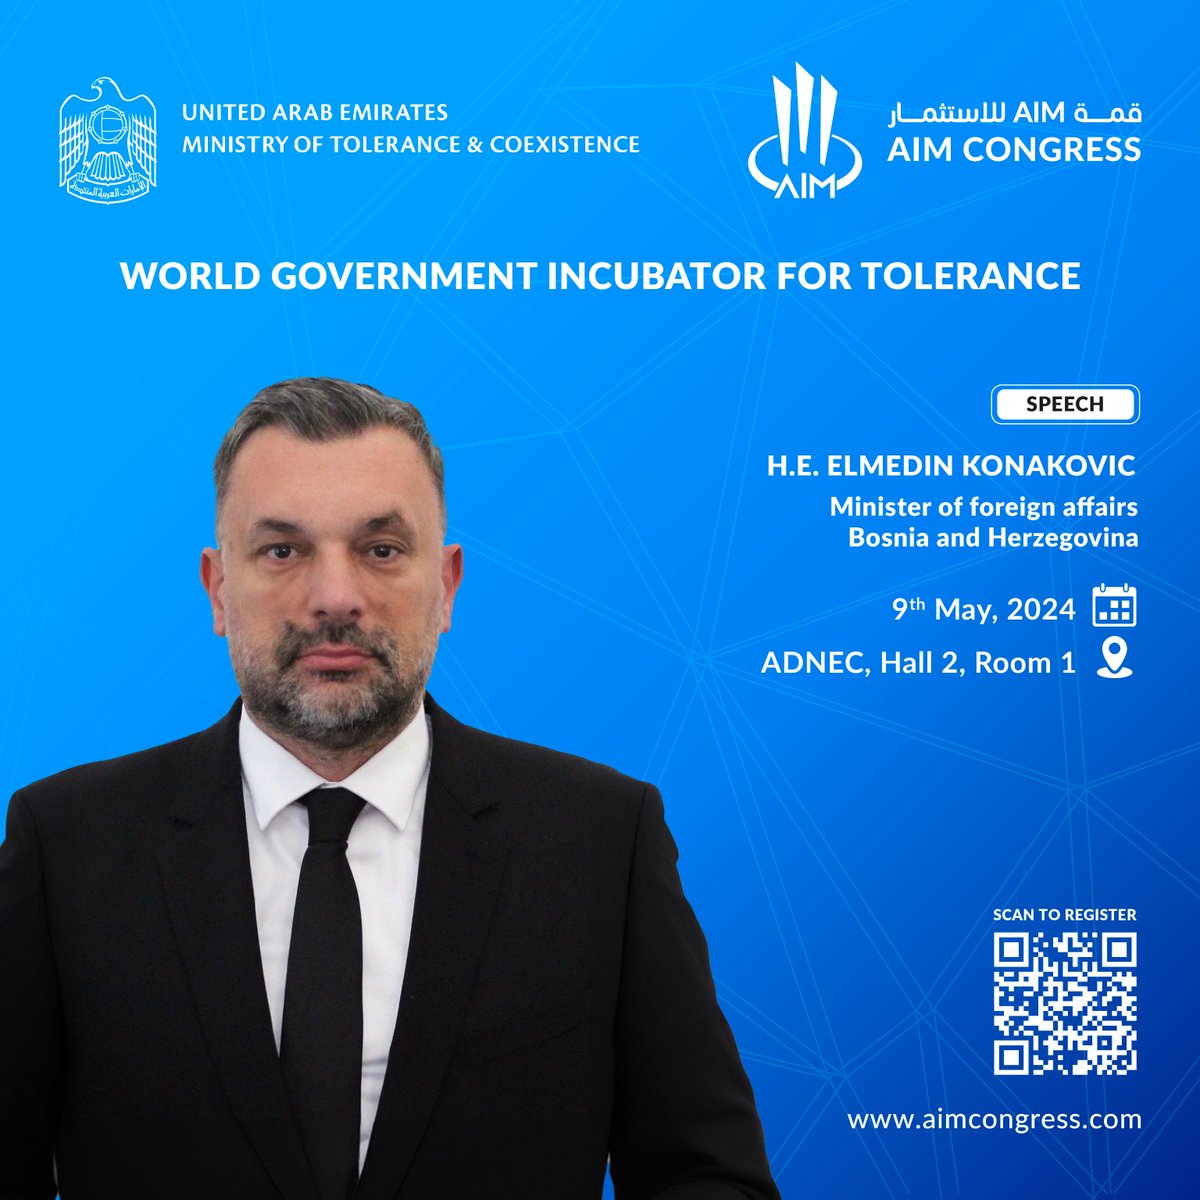 Don't miss Elmedin Konaković, Minister of Foreign Affairs of Bosnia and Herzegovina, as he shares his invaluable perspectives at our influential session.  Join us to gain deep insights into global diplomacy and cooperation! 

#GlobalDiplomacy #LeadershipInsights #AIMCongress2024